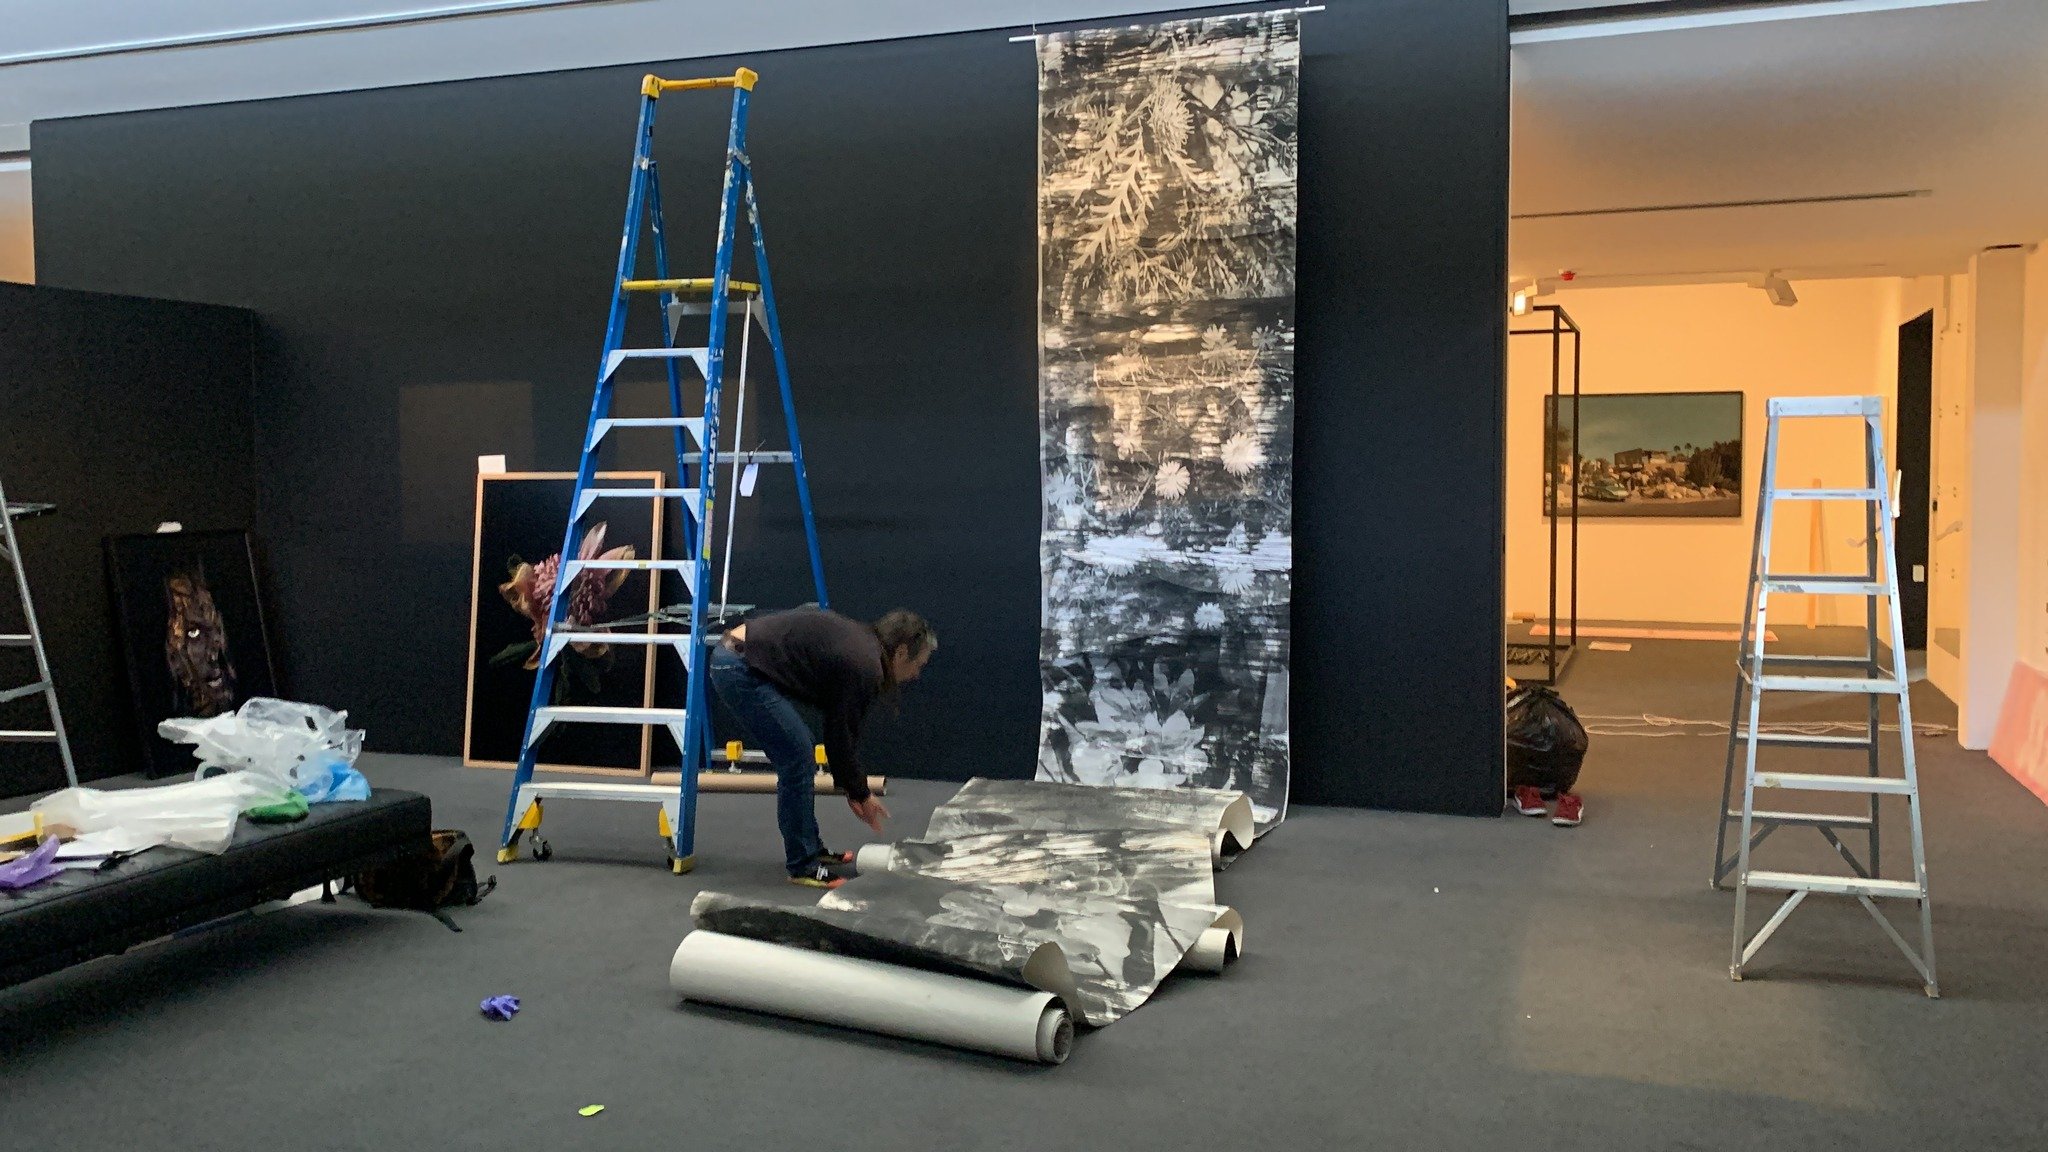  Zo Damage installing "TRUST" (2022) – MAPh Bowness Photography Prize 2023 shortlist – for the MAPh Bowness Prize 2023 finalist group exhibition. Photo courtesy MAPh, 2023 